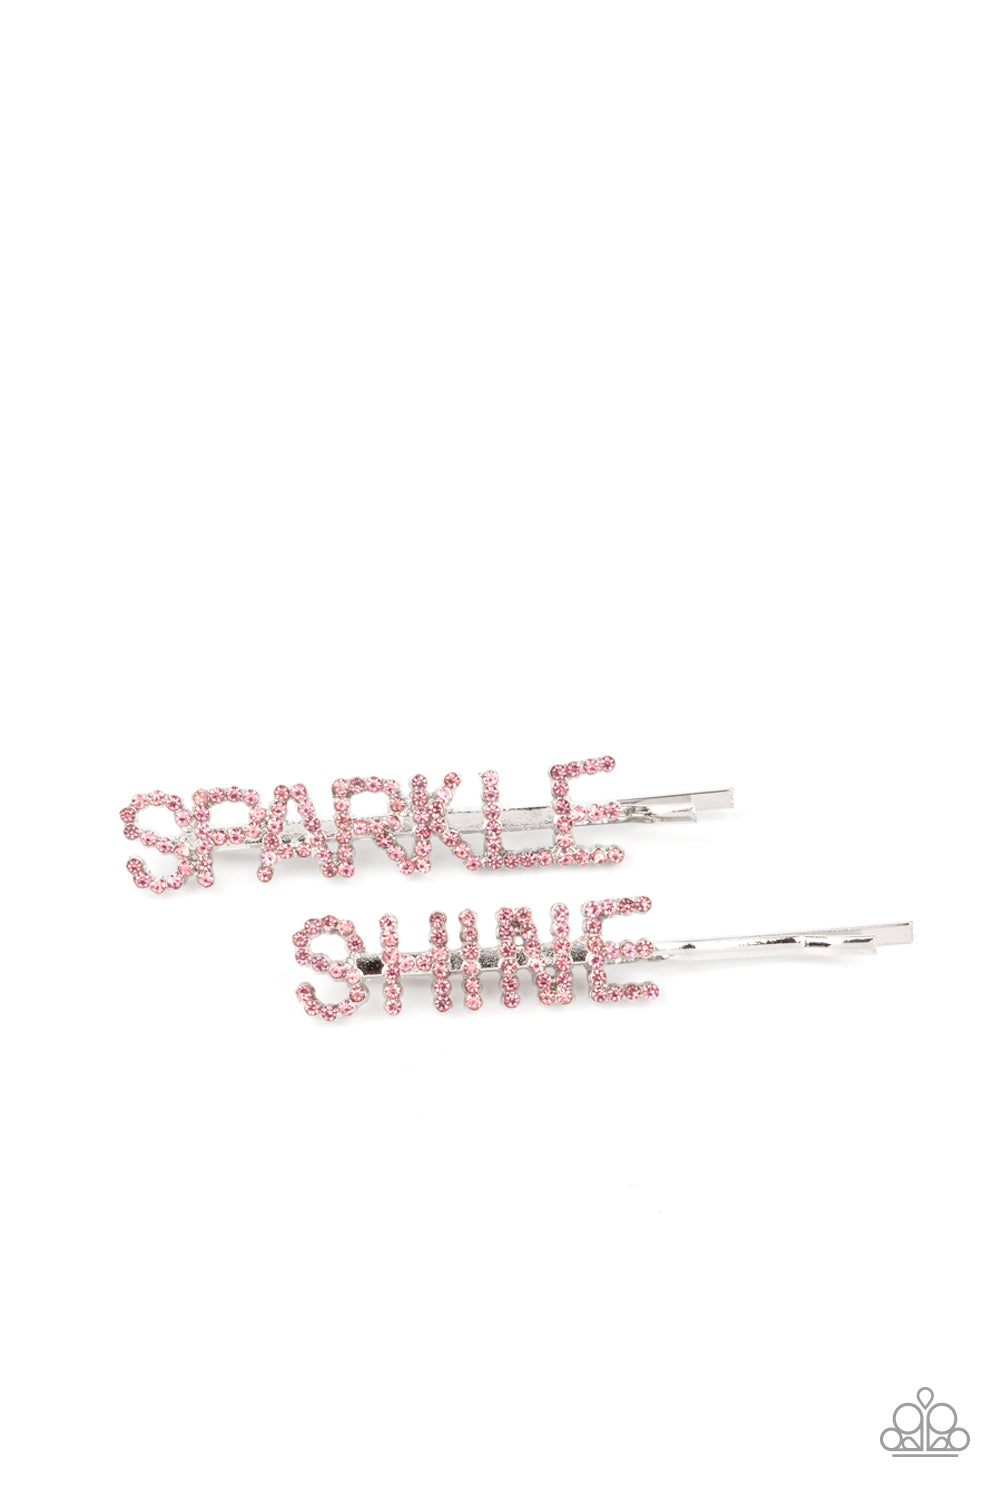 Center of the SPARKLE-verse Pink Hair Clip - Paparazzi Accessories. Glassy pink rhinestones spell out "Sparkle," and "Shine," across the fronts of two silver bobby pins, creating a sparkly duo.  All Paparazzi Accessories are lead free and nickel free!  Sold as one pair of decorative bobby pins.